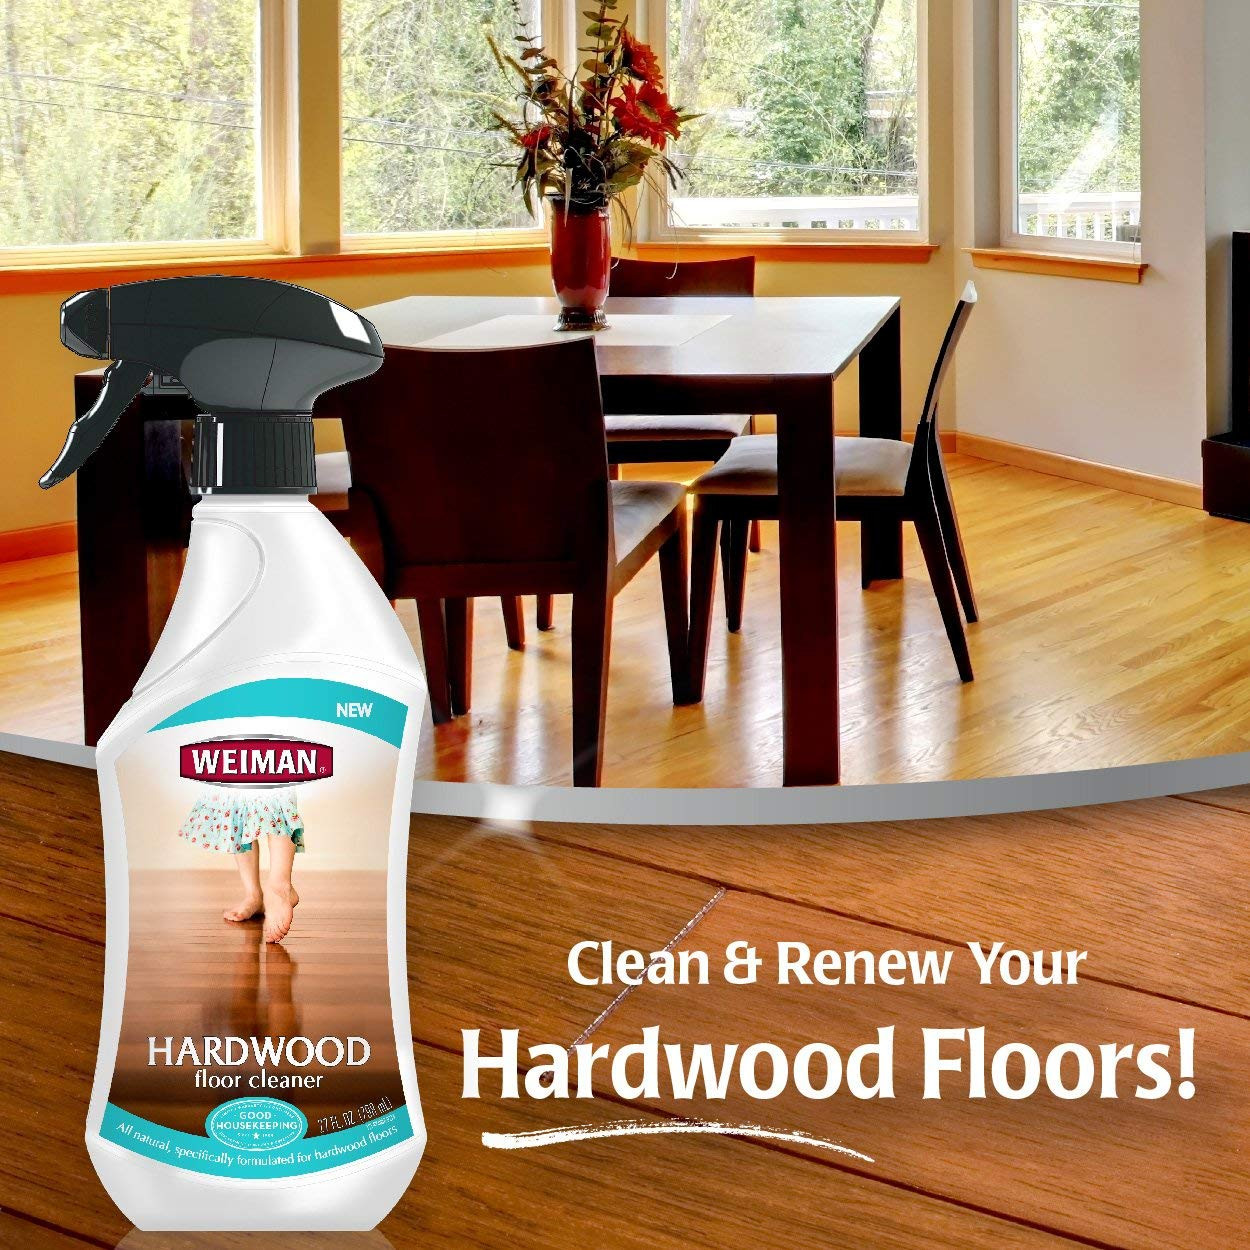 16 Recommended Best Vacuums for Hardwood Floors 2016 2024 free download best vacuums for hardwood floors 2016 of amazon com weiman hardwood floor cleaner surface safe no harsh with amazon com weiman hardwood floor cleaner surface safe no harsh scent safe for use